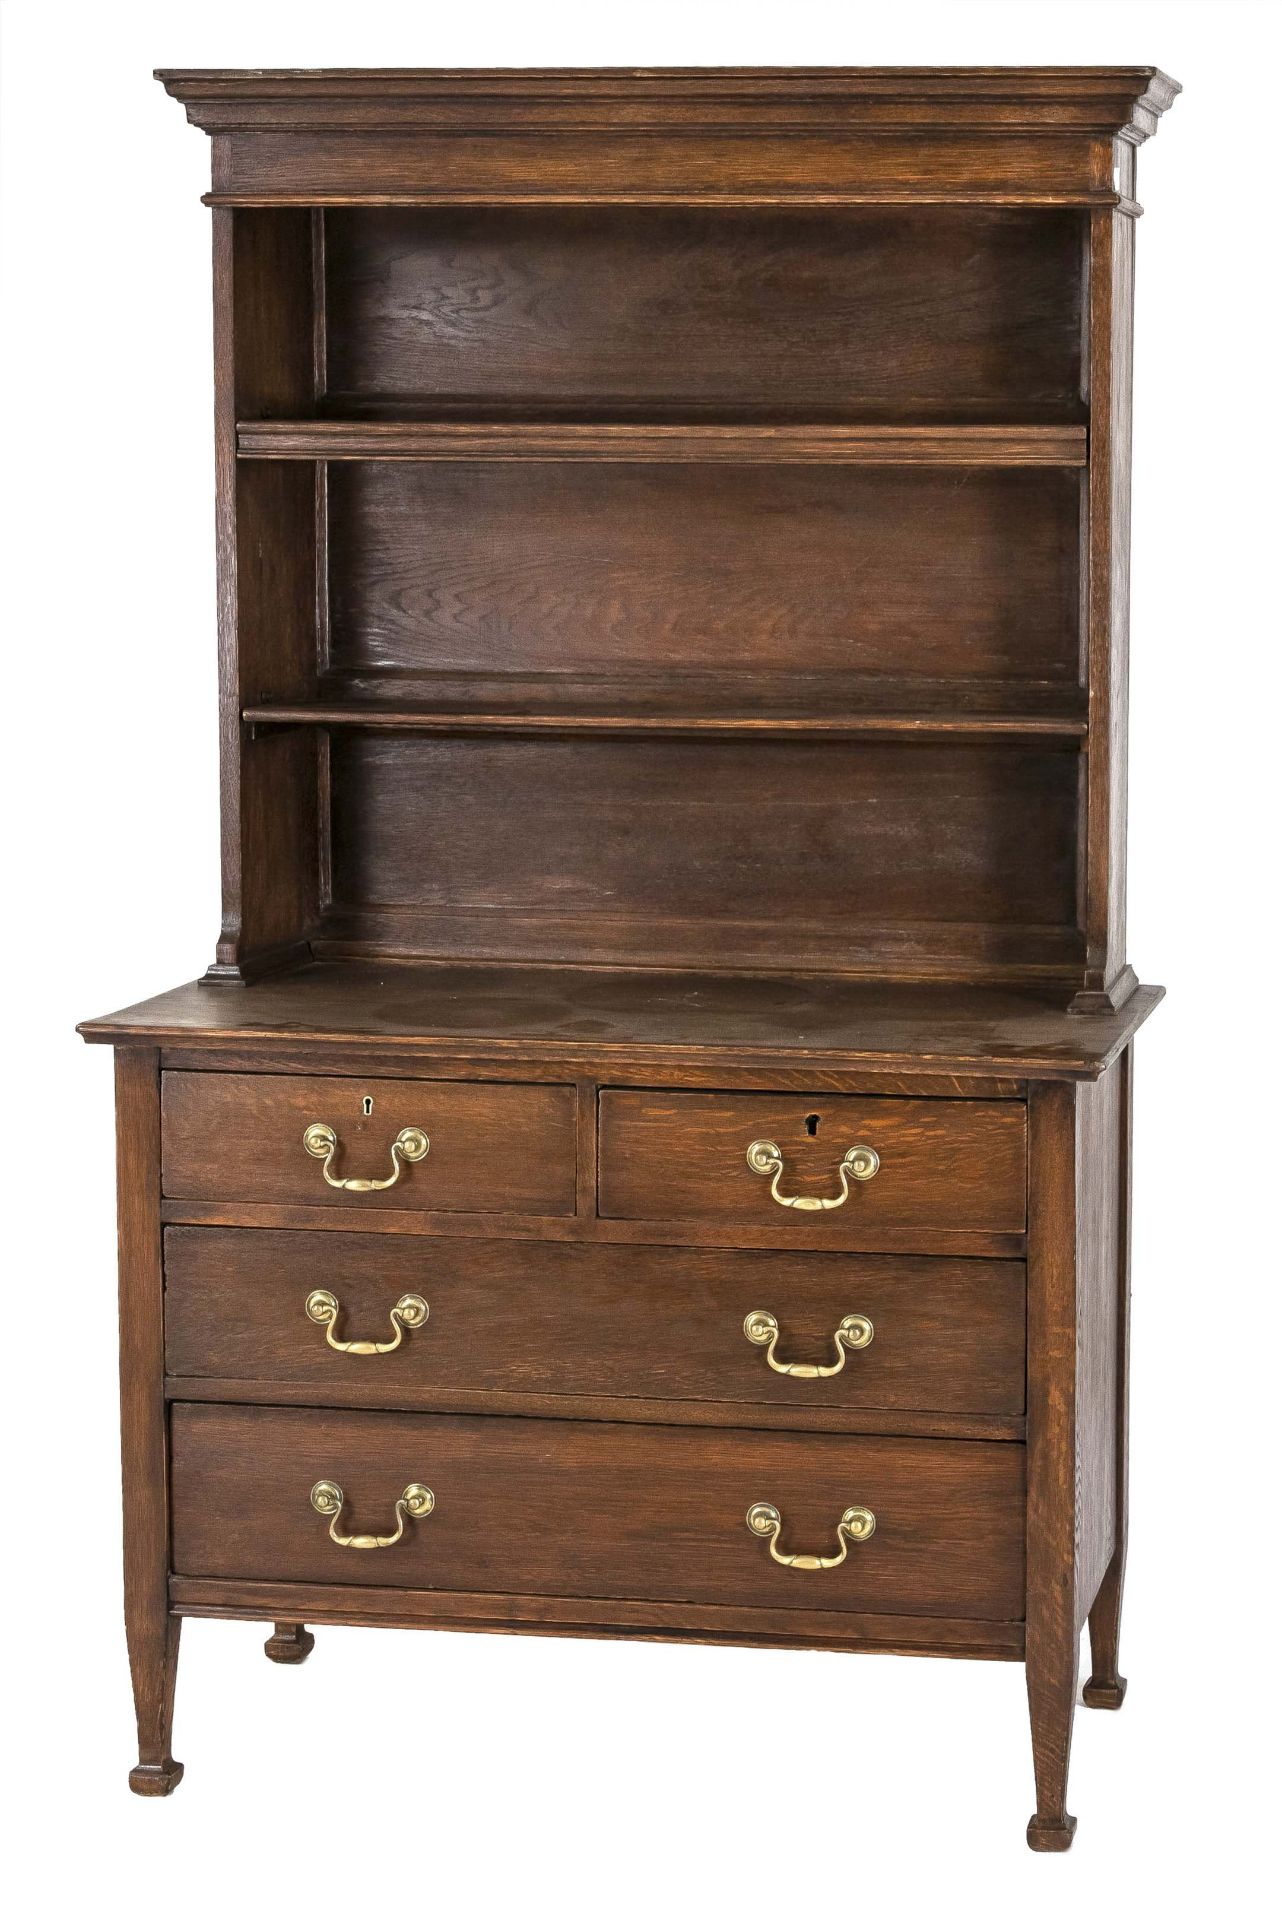 Chest of drawers, England circa 1910, solid oak, 167 x 101 x 50 cm.- The furniture can not be viewed